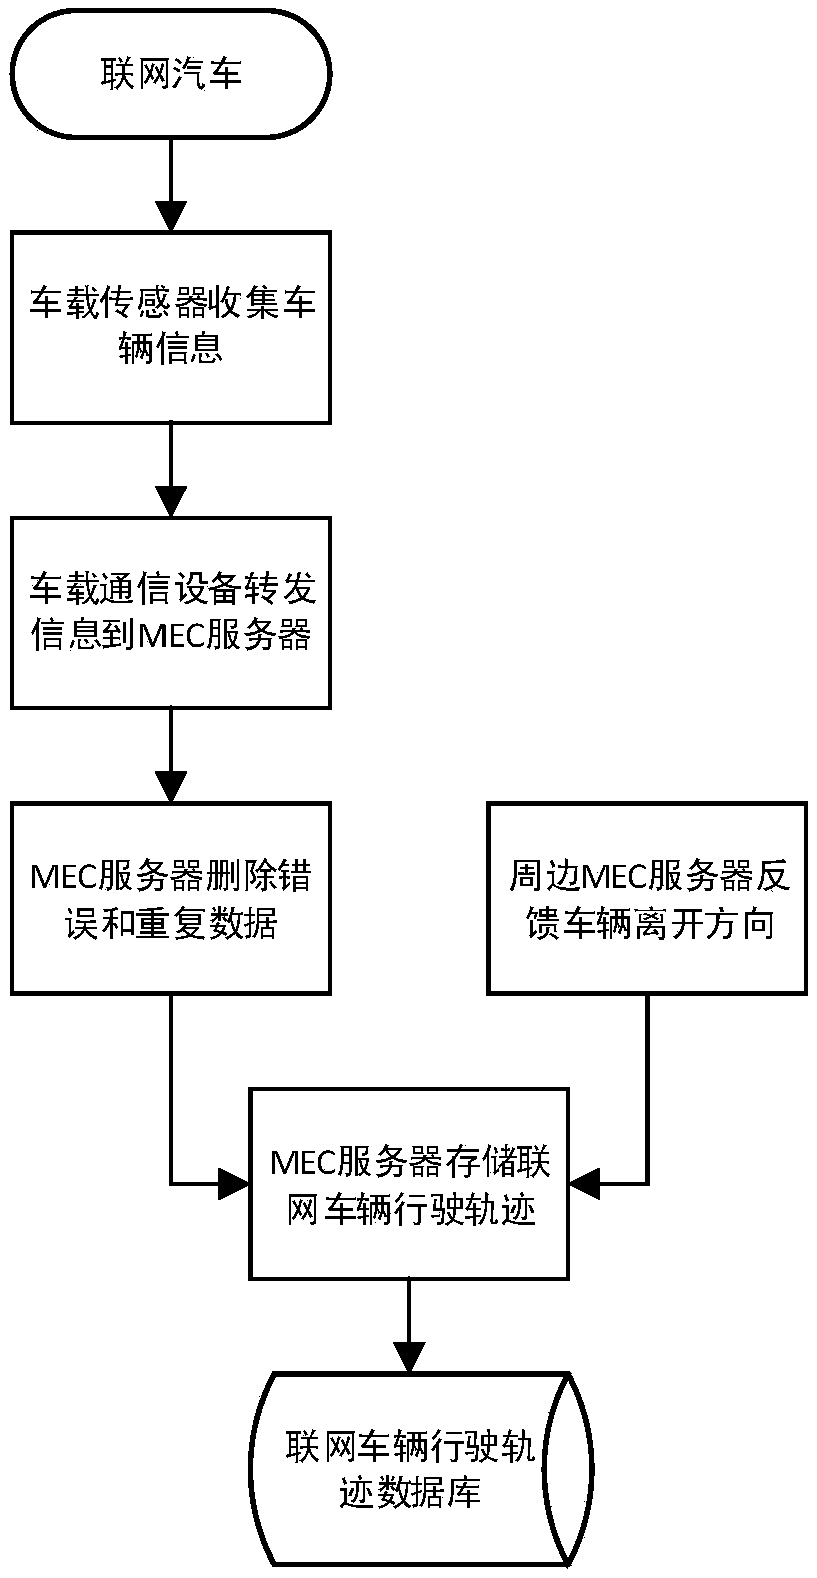 Vehicle locus prediction and MEC application migration method based on extreme learning